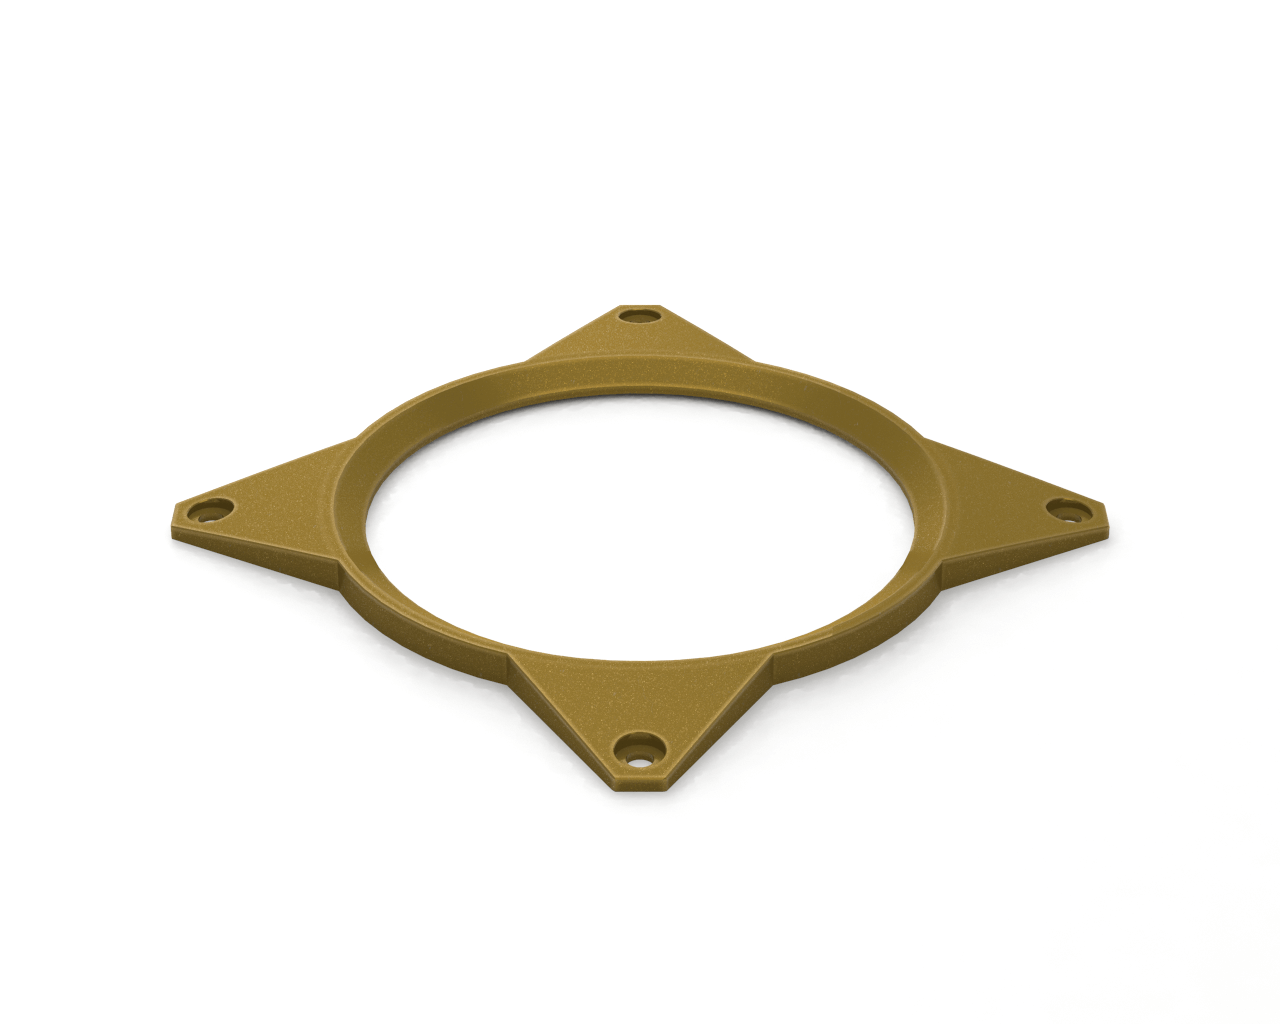 BSTOCK:PrimoChill 120mm Aluminum SX Fan Cover - Gold - PrimoChill - KEEPING IT COOL